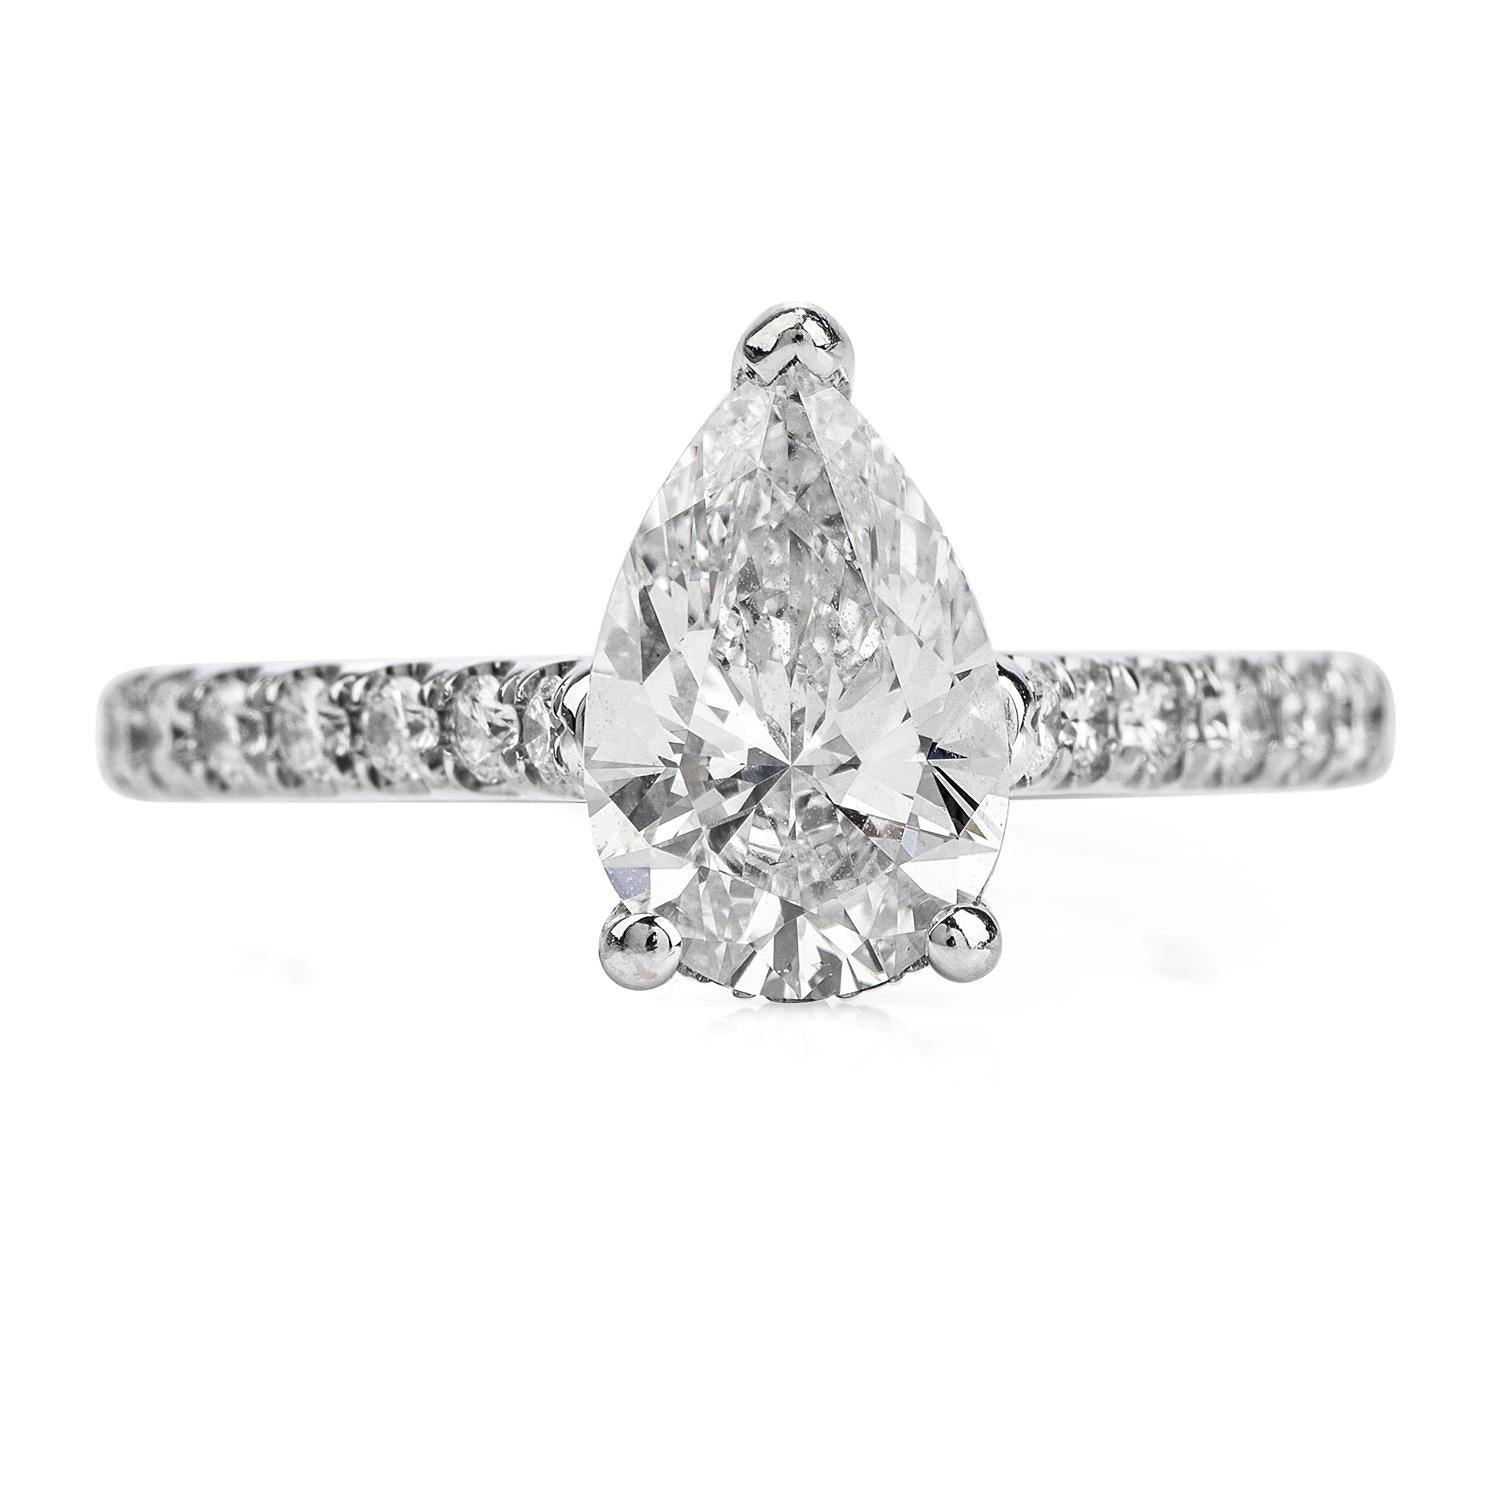 This stunning diamond engagement ring is crafted in solid 14k white gold. Displaying a three-prong set GIA certified pear diamond approx. 1.70 carats, D color,  VS2 clarity. Embellished by a pave set diamond on the shank and under